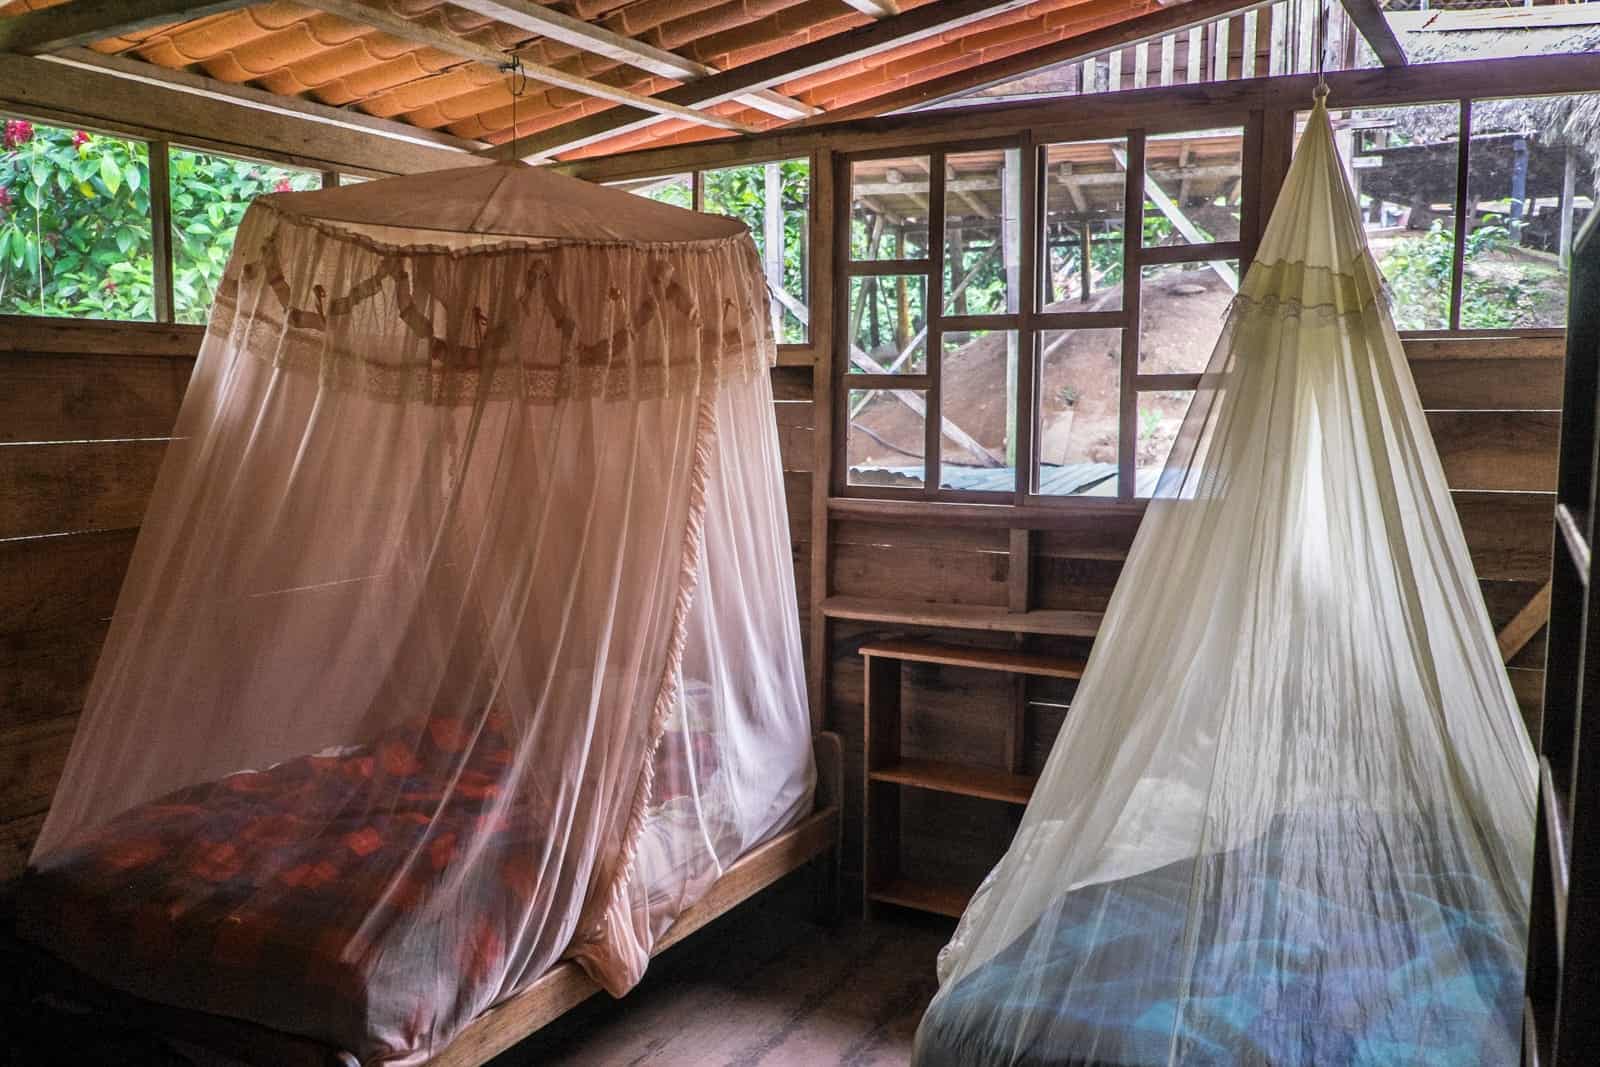 Two beds in a wooden hut, each with a mosquito net attached from the ceiling, with windows looking out to the green of the Amazon jungle. lEcuador Amazon lodge bedroom